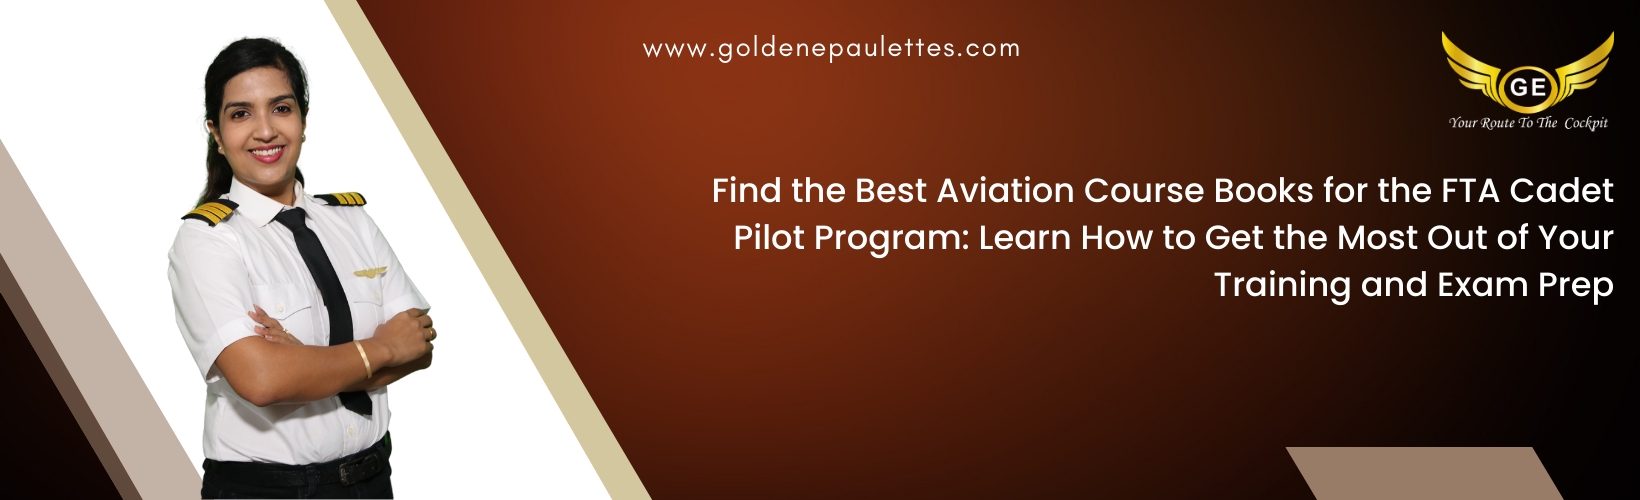 Finding the Right Aviation Course Books for the FTA Cadet Pilot Program